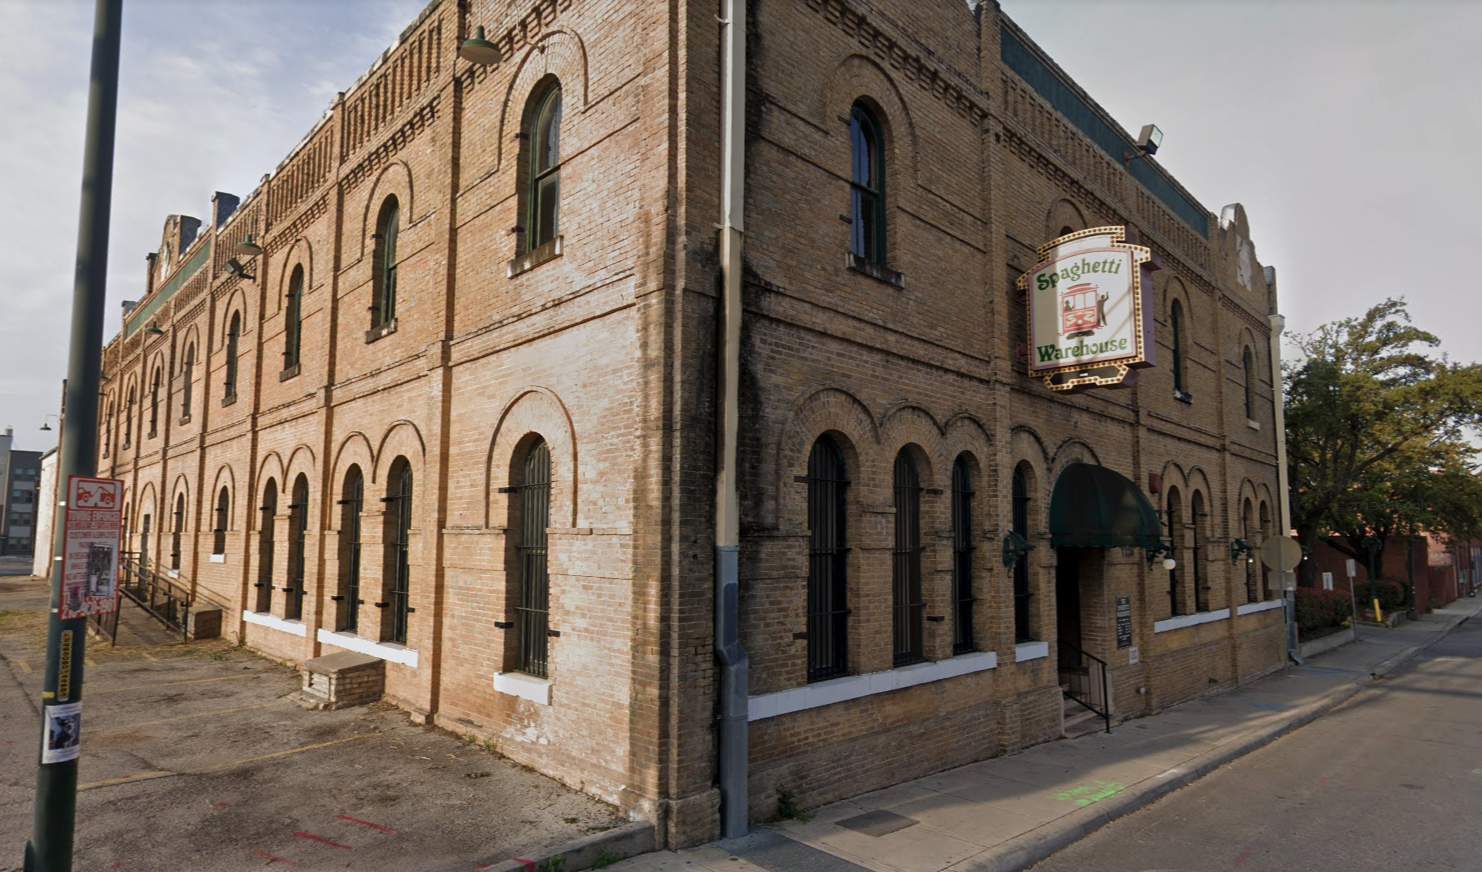 Spaghetti Warehouse Auctioning Off Bizarre Items After Covid 19